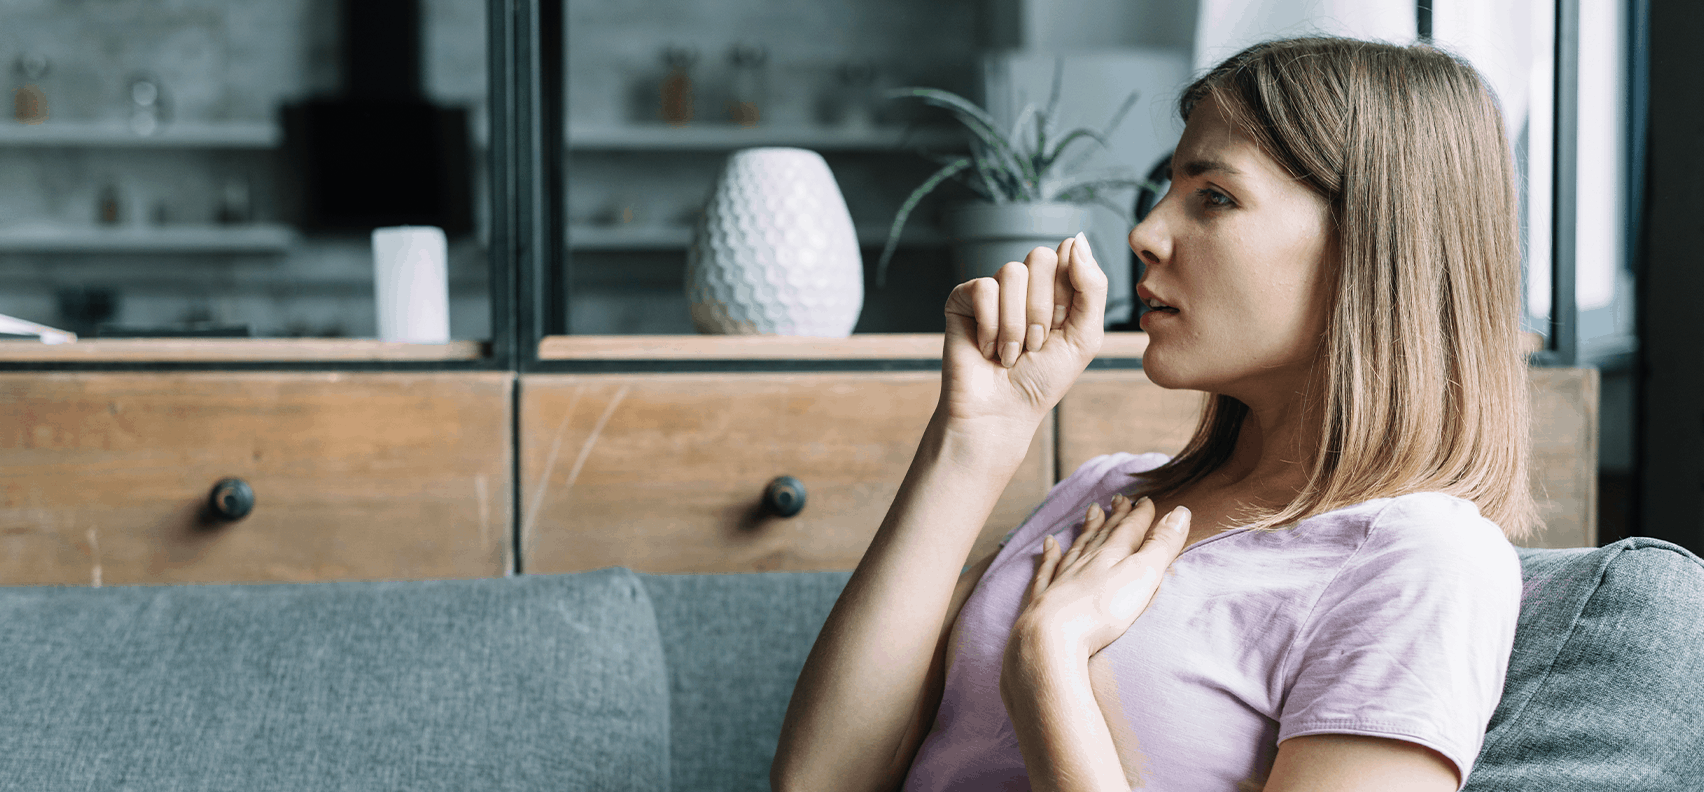 Can allergies cause coughing?